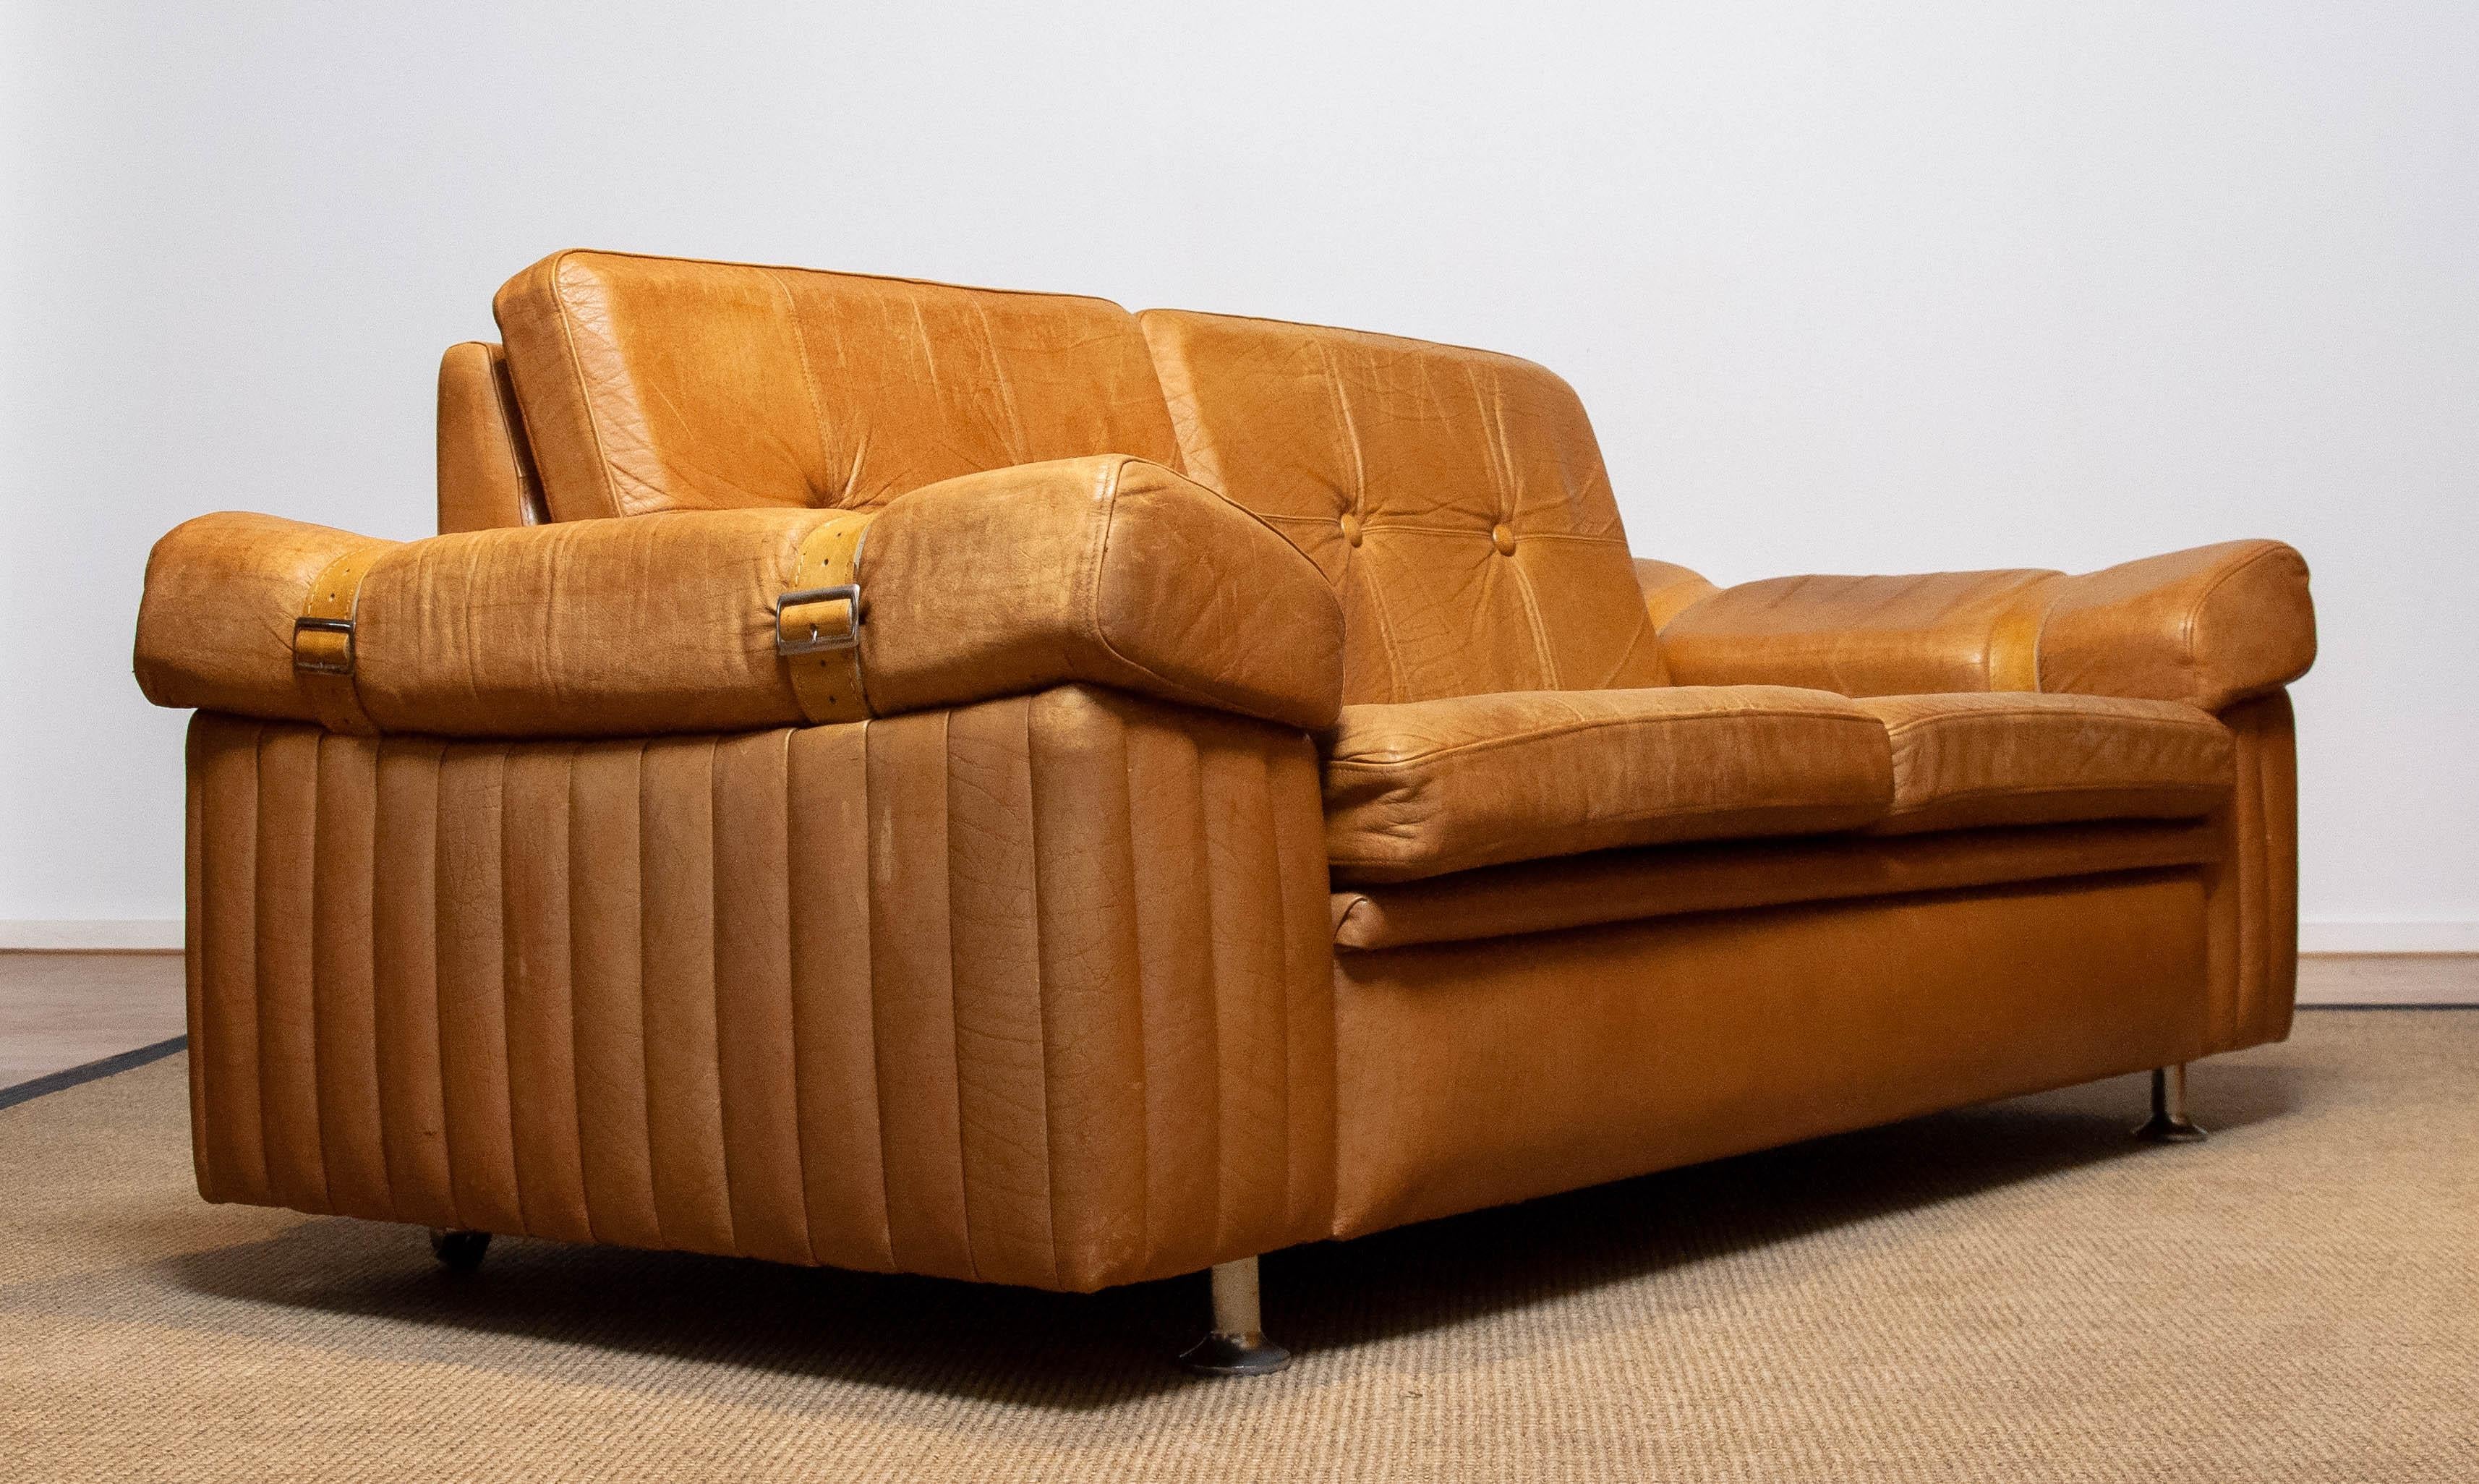 1970s Scandinavian Brutalist Two-Seater Low-Back Sofa in Camel Colored Leather For Sale 3